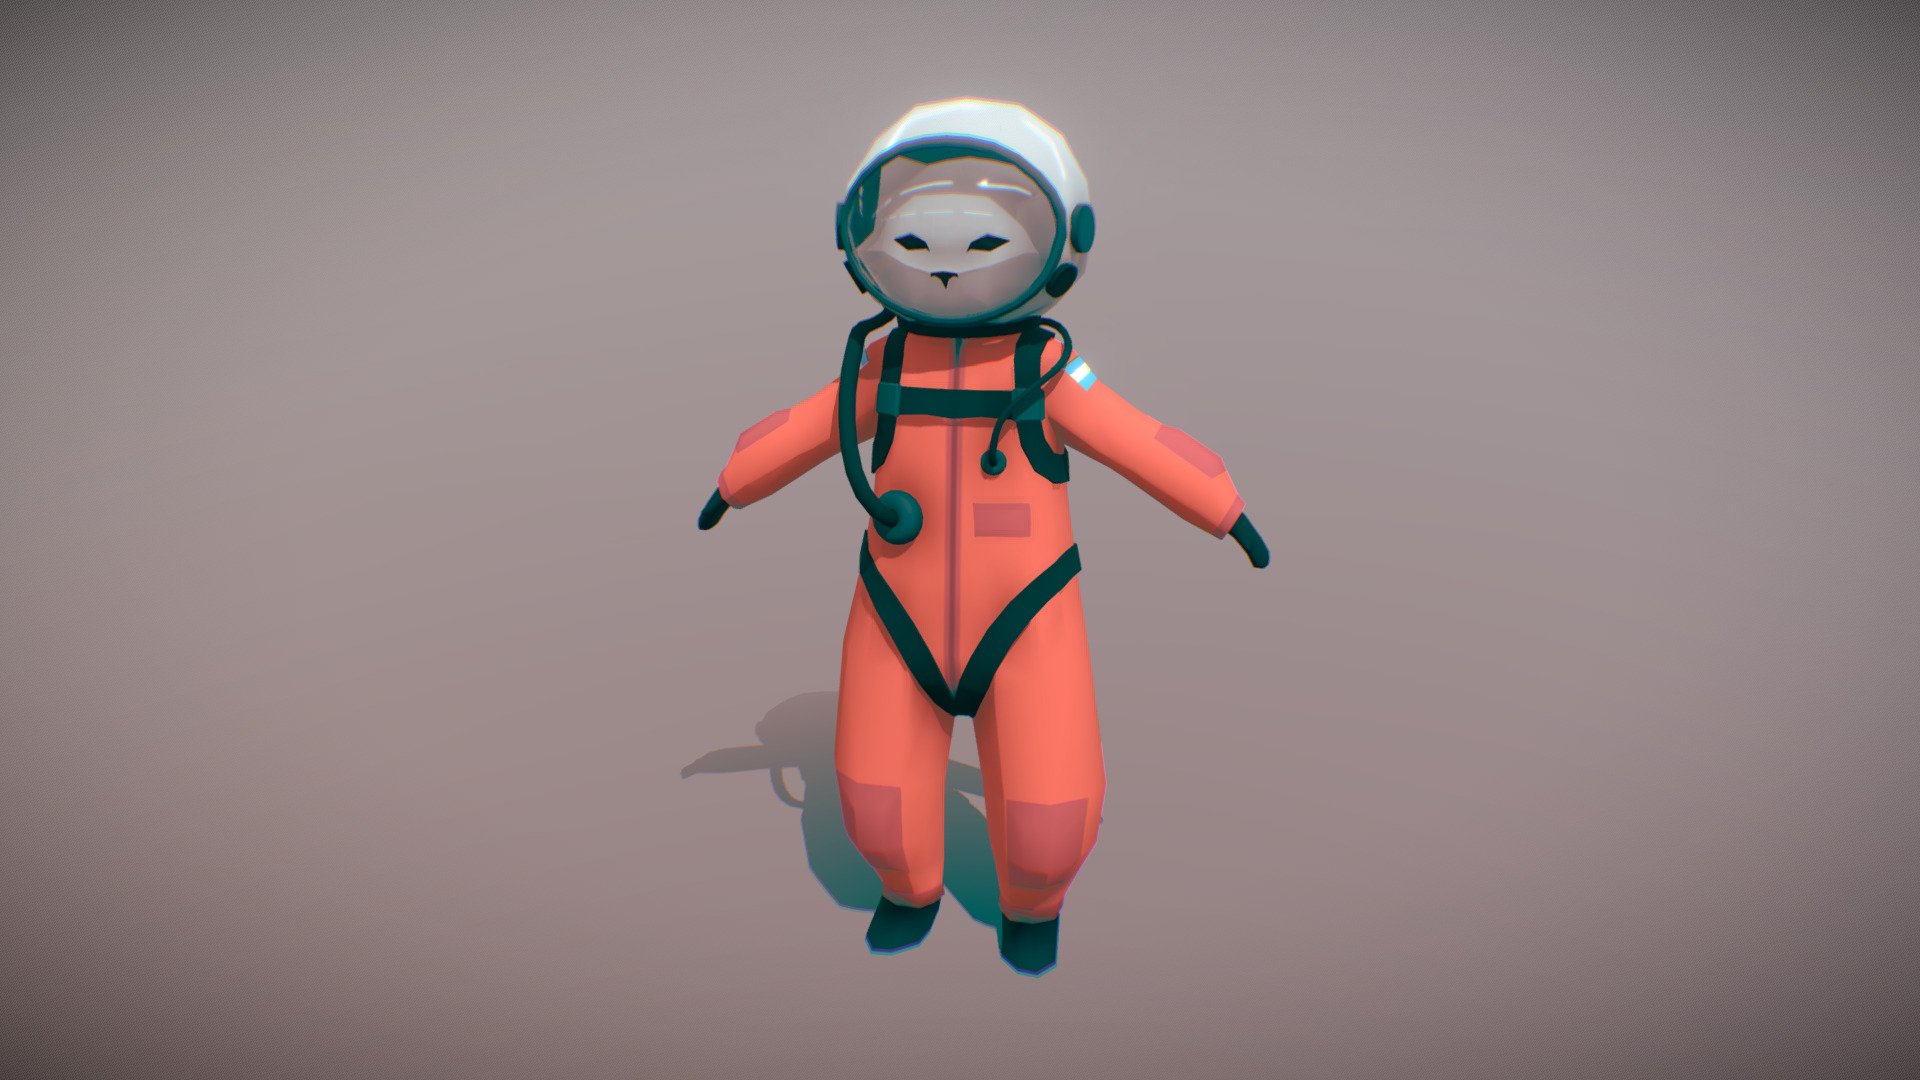 This is a character I've made for my game entry on the Epic MegaJam 2019, a gamejam hosted by Epic Games, in wich participants had to make a game based on a given theme in seven days using the Unreal-game-Engine. On top of this, there was a modifier category called Space Cats, for the best game incorporating &ldquo;Space Cats